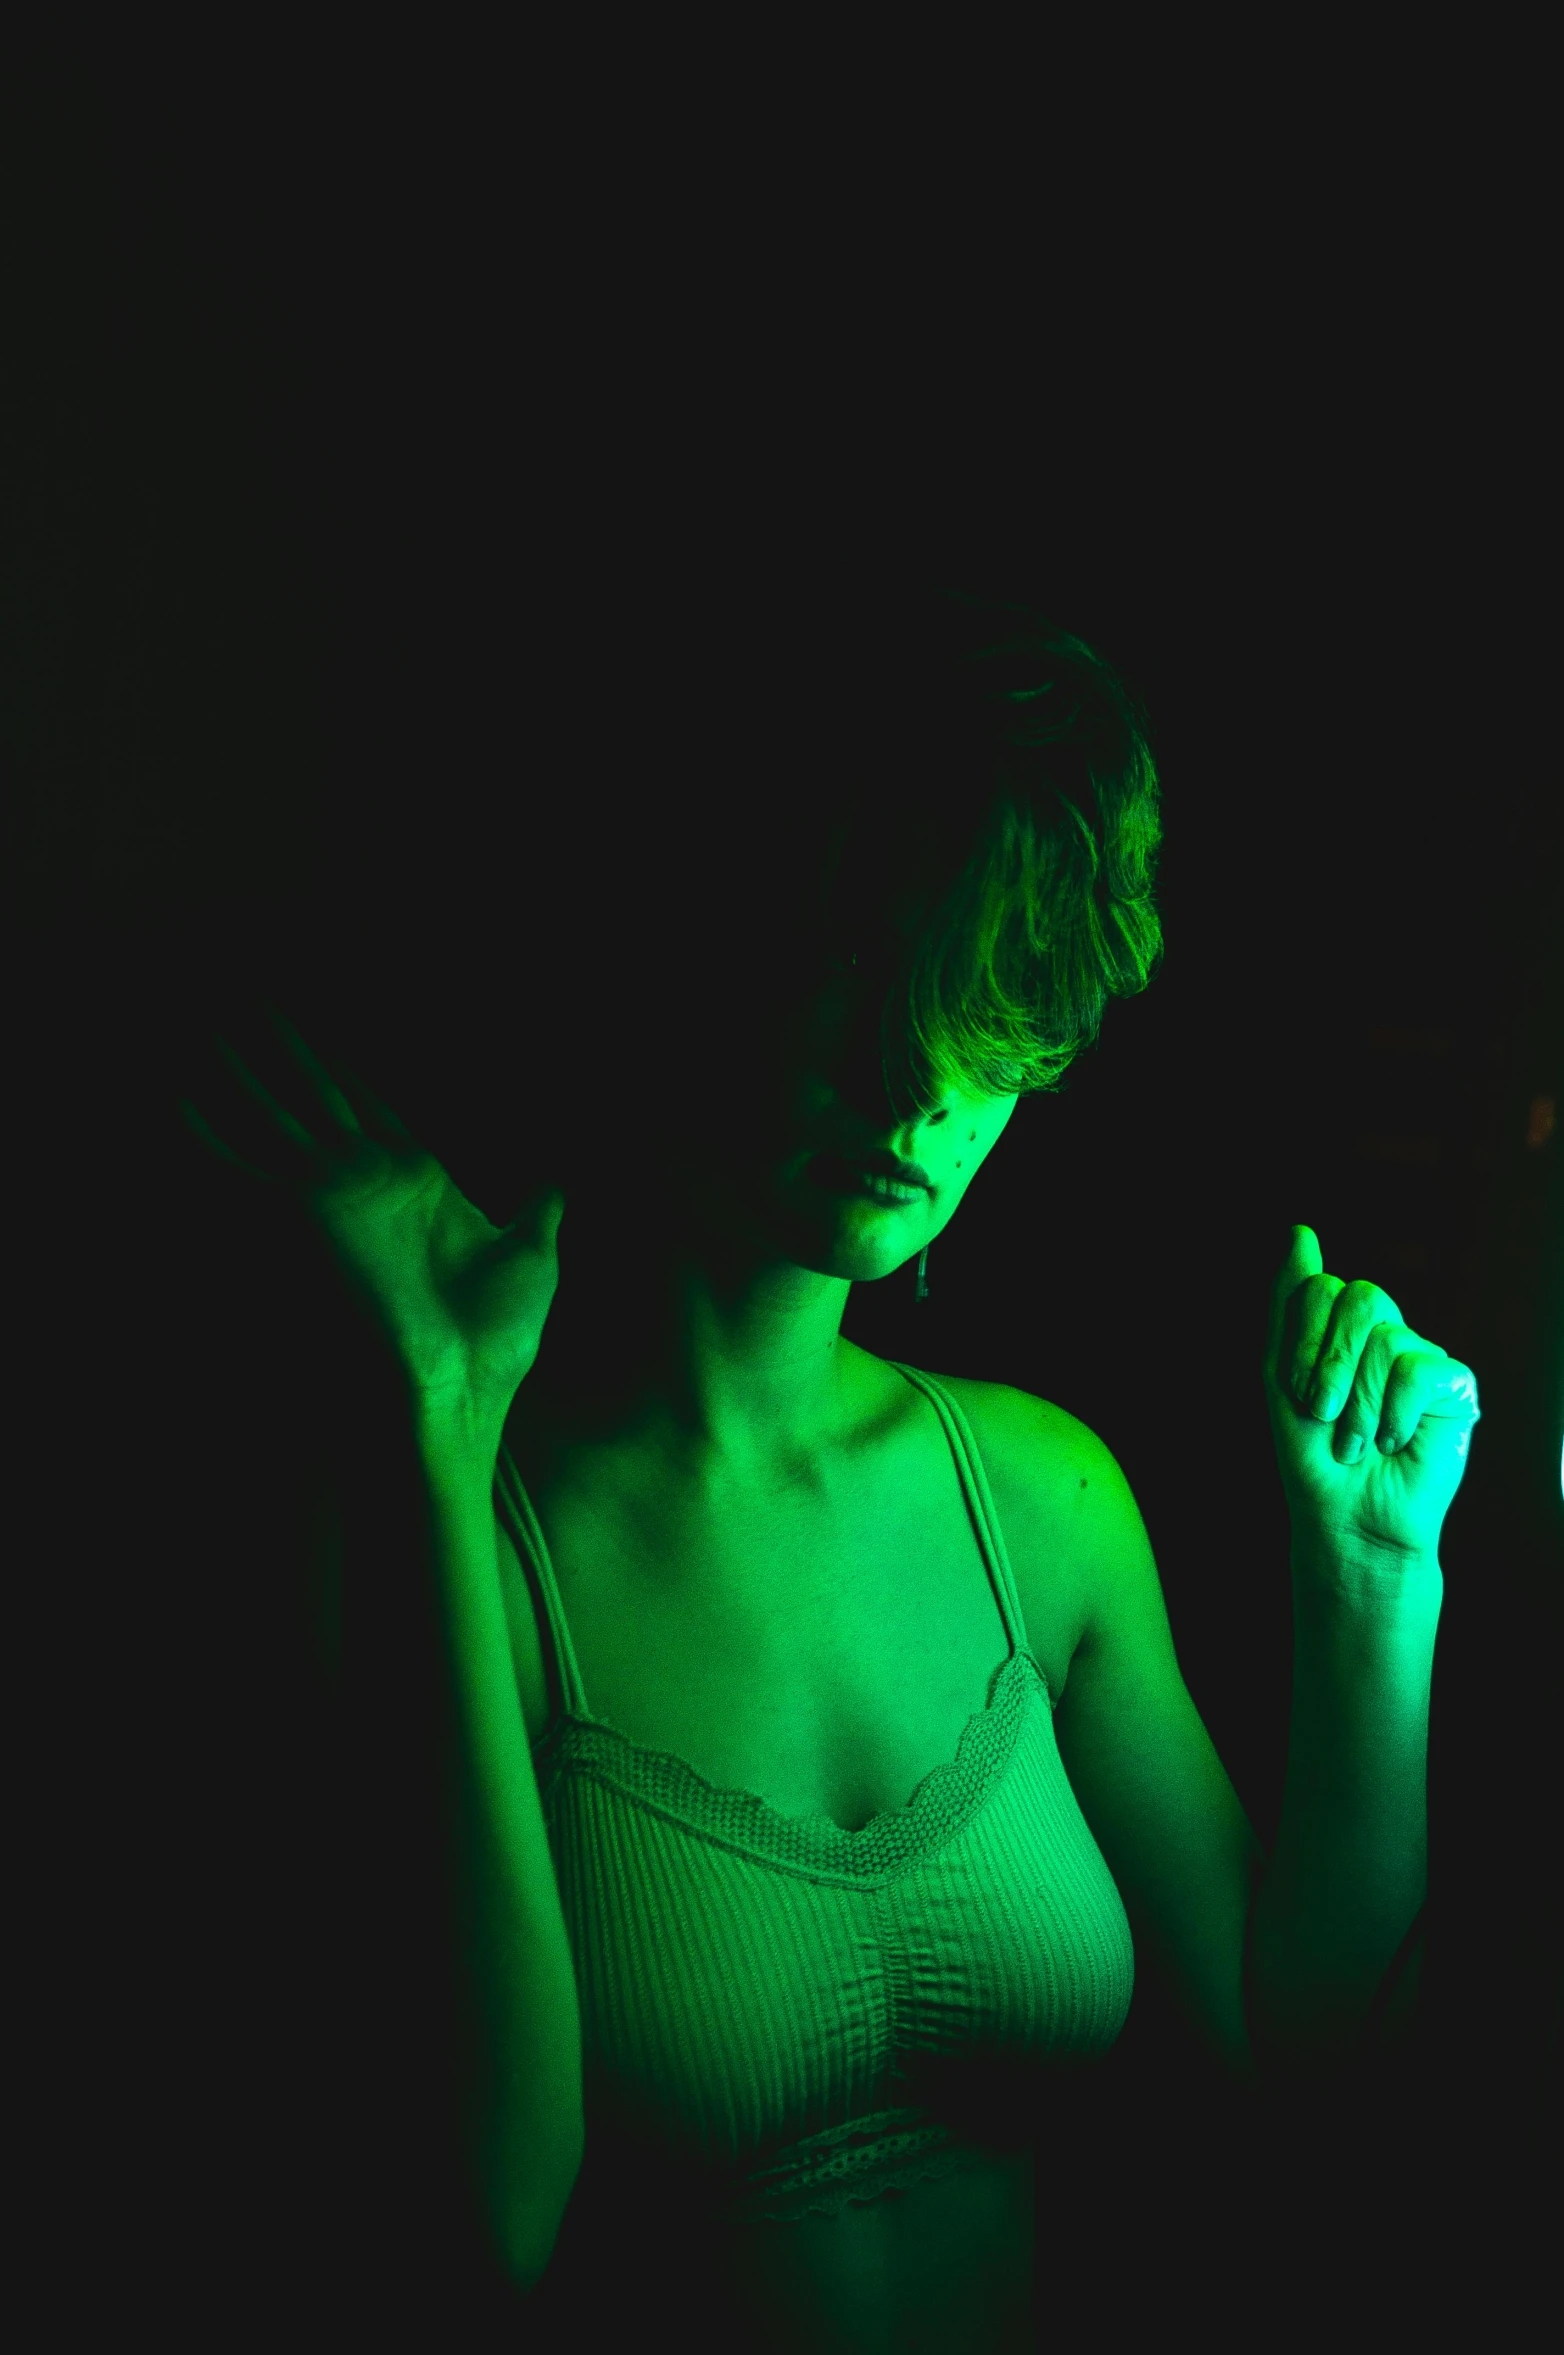 a woman holding a cell phone in the dark, an album cover, inspired by Elsa Bleda, pexels, visual art, green body, model posing, green concert light, pale woman